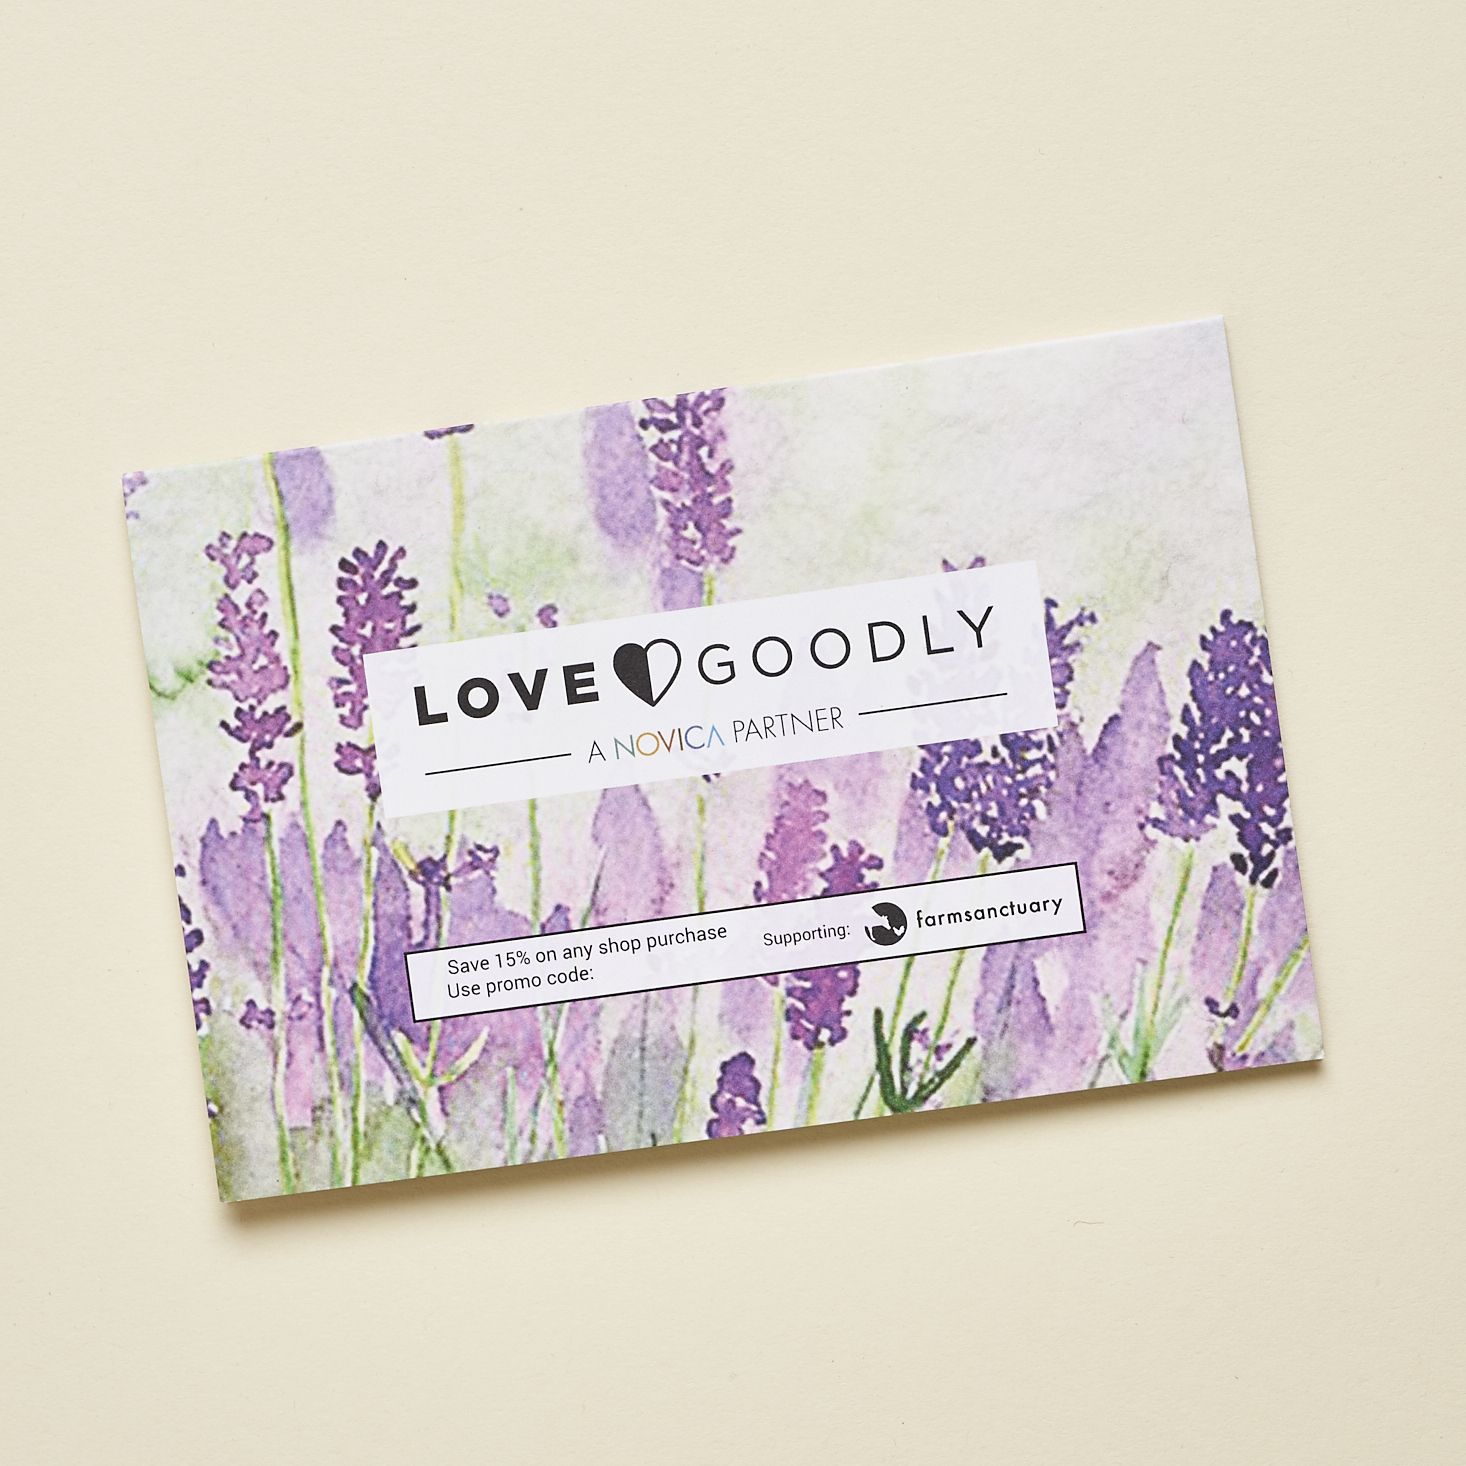 Love Goodly welcome card